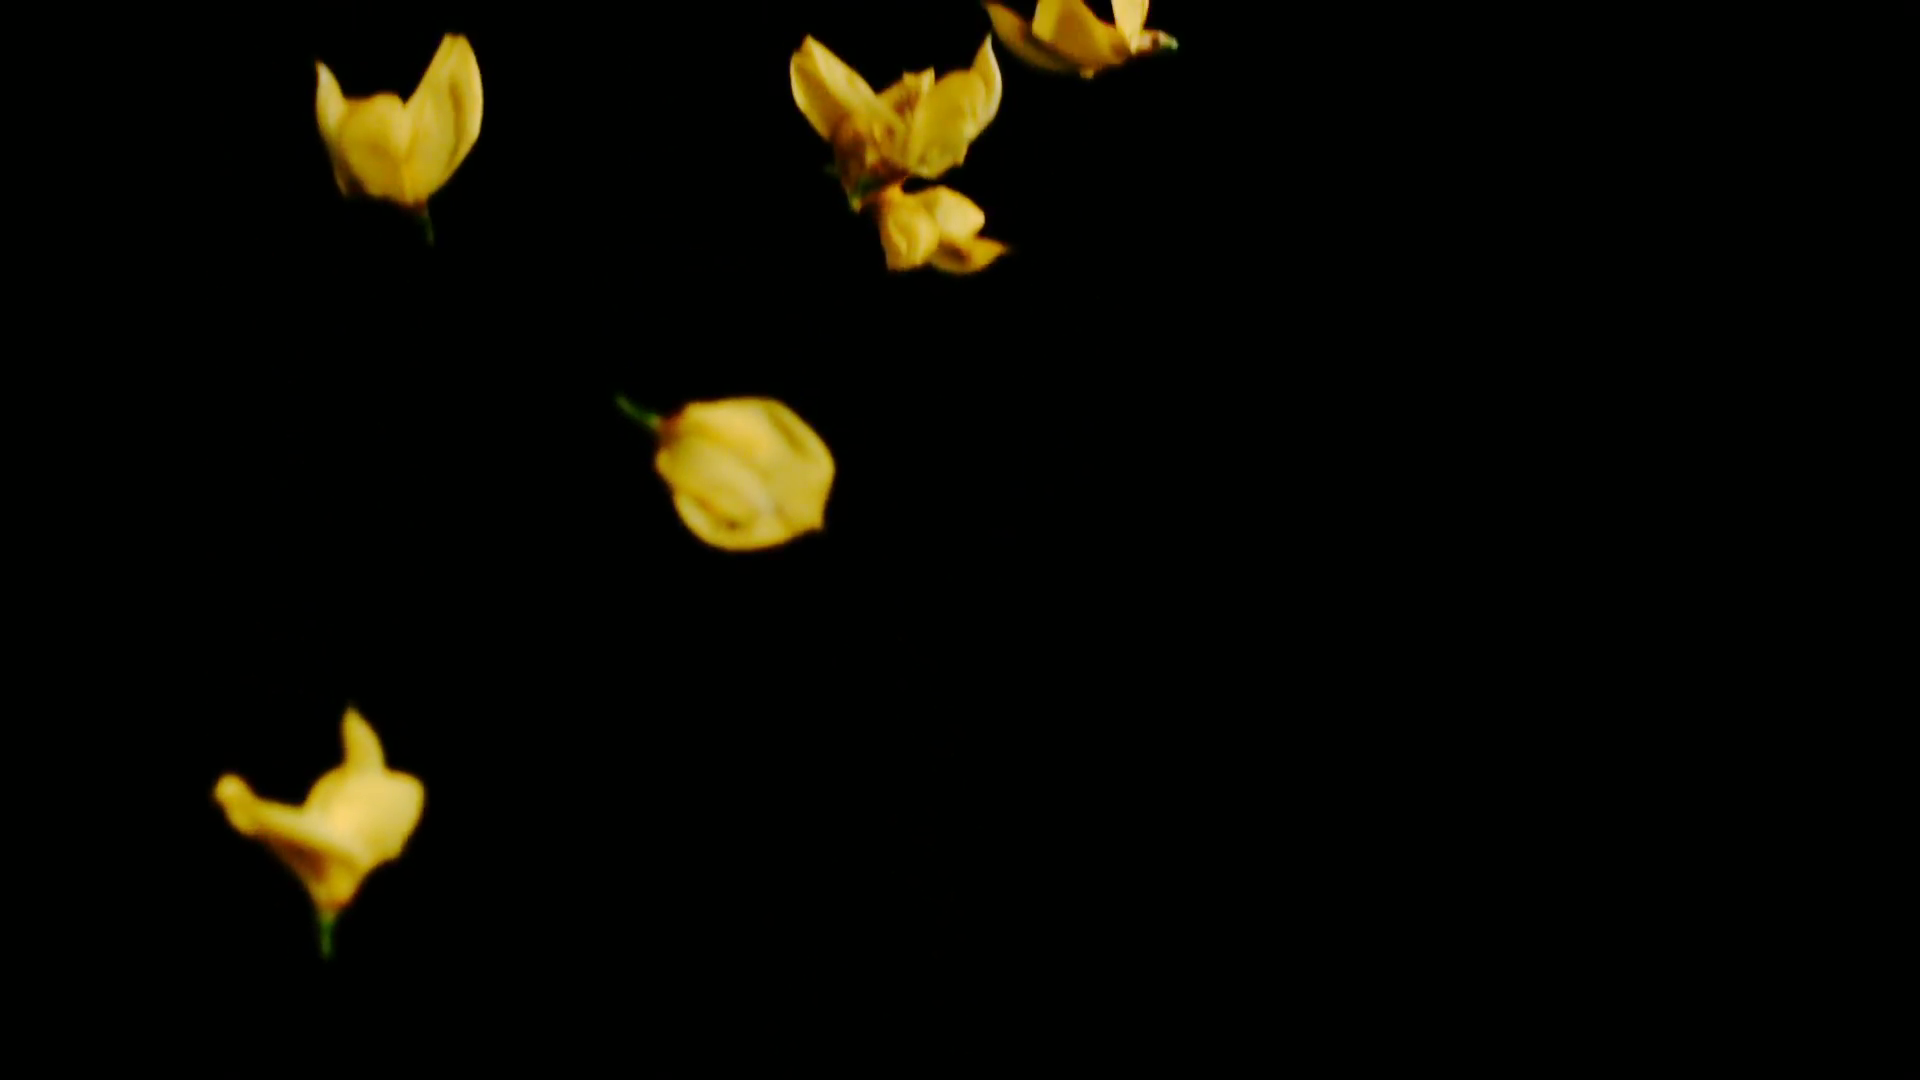 Flower Petals Falling Yellow Slow Motion Stock Video Footage ...